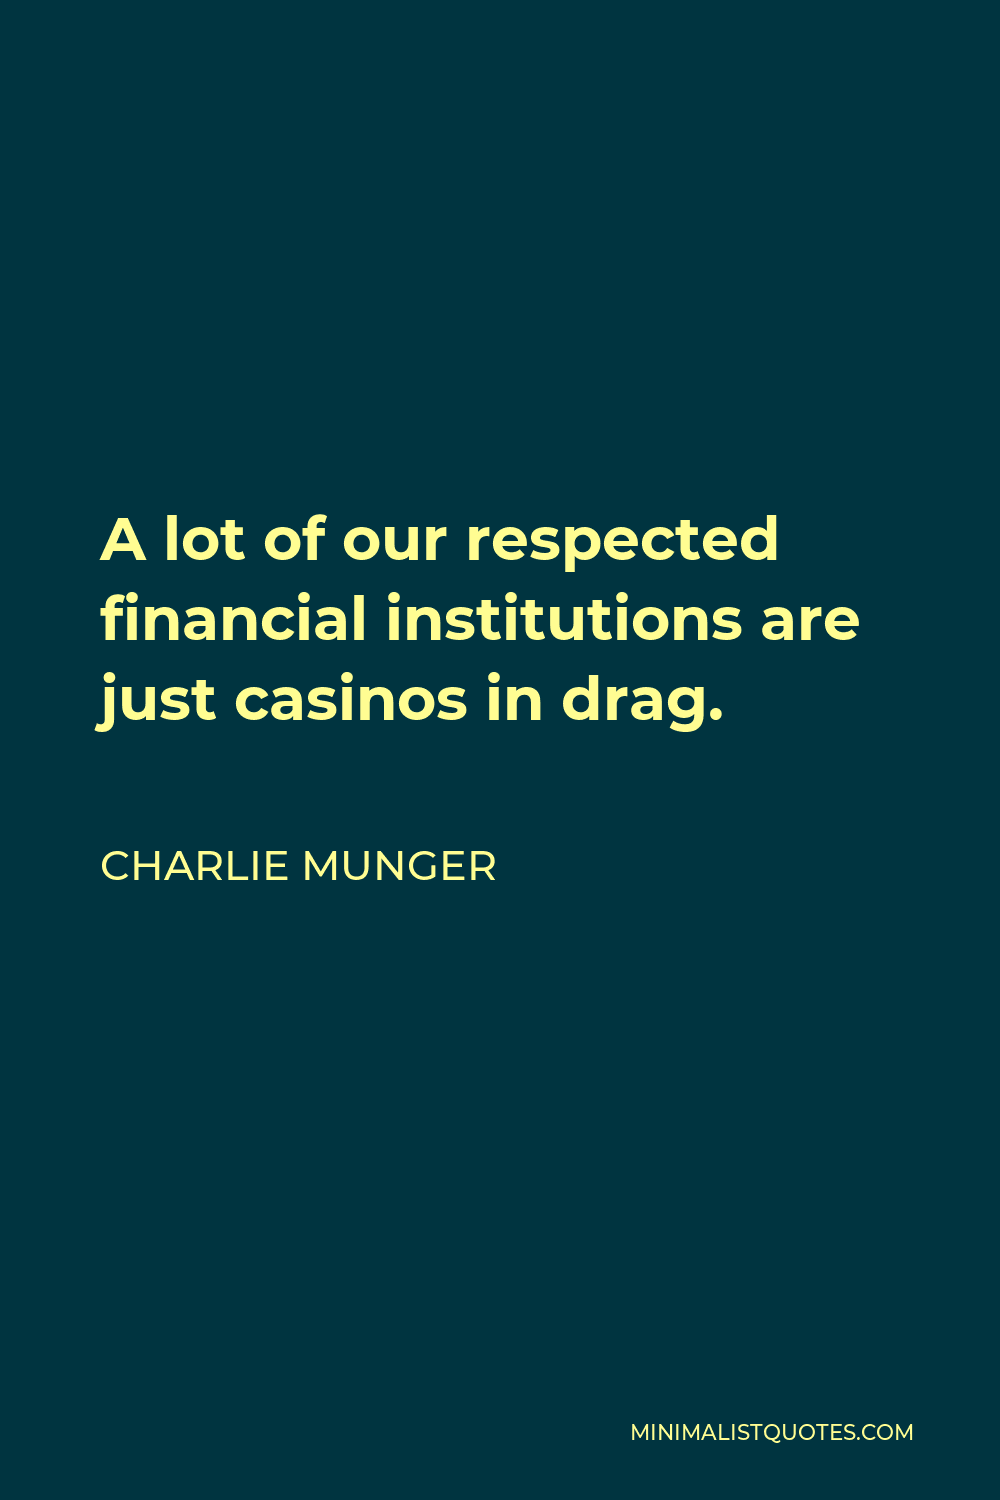 Charlie Munger Quote - A lot of our respected financial institutions are just casinos in drag.